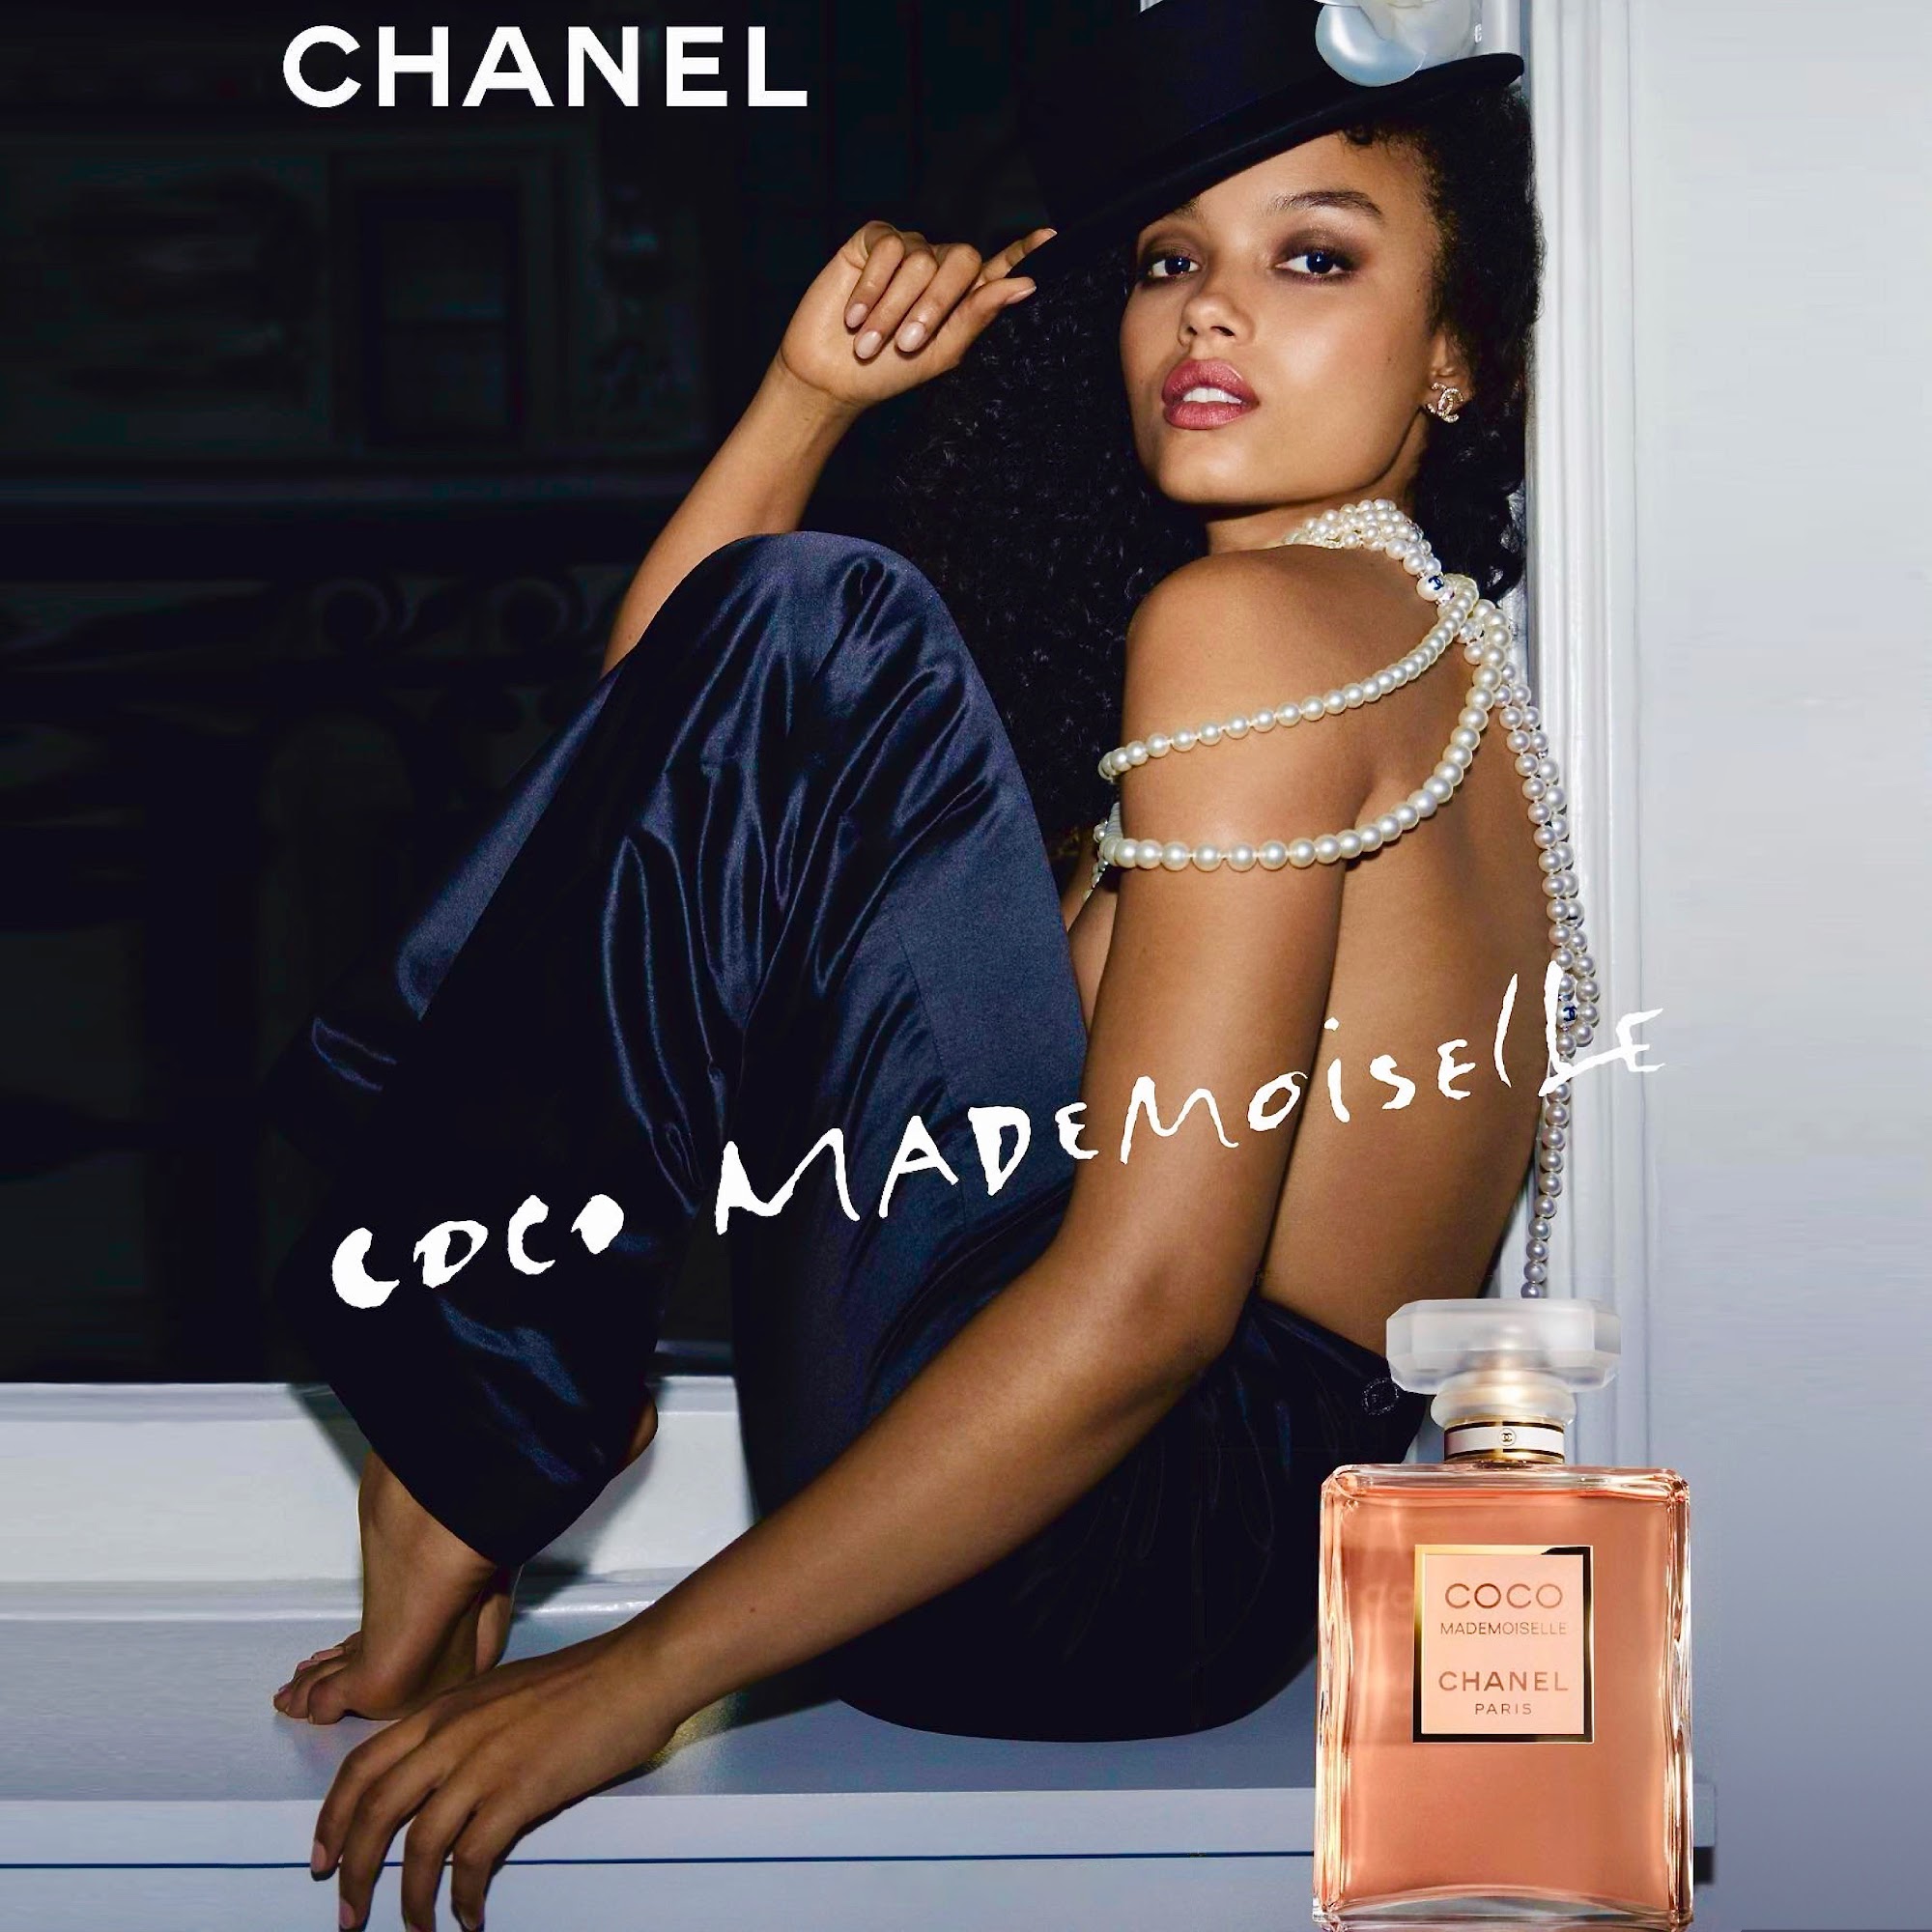 Chanel advert for Coco Mademoiselle featuring Whitney Peak